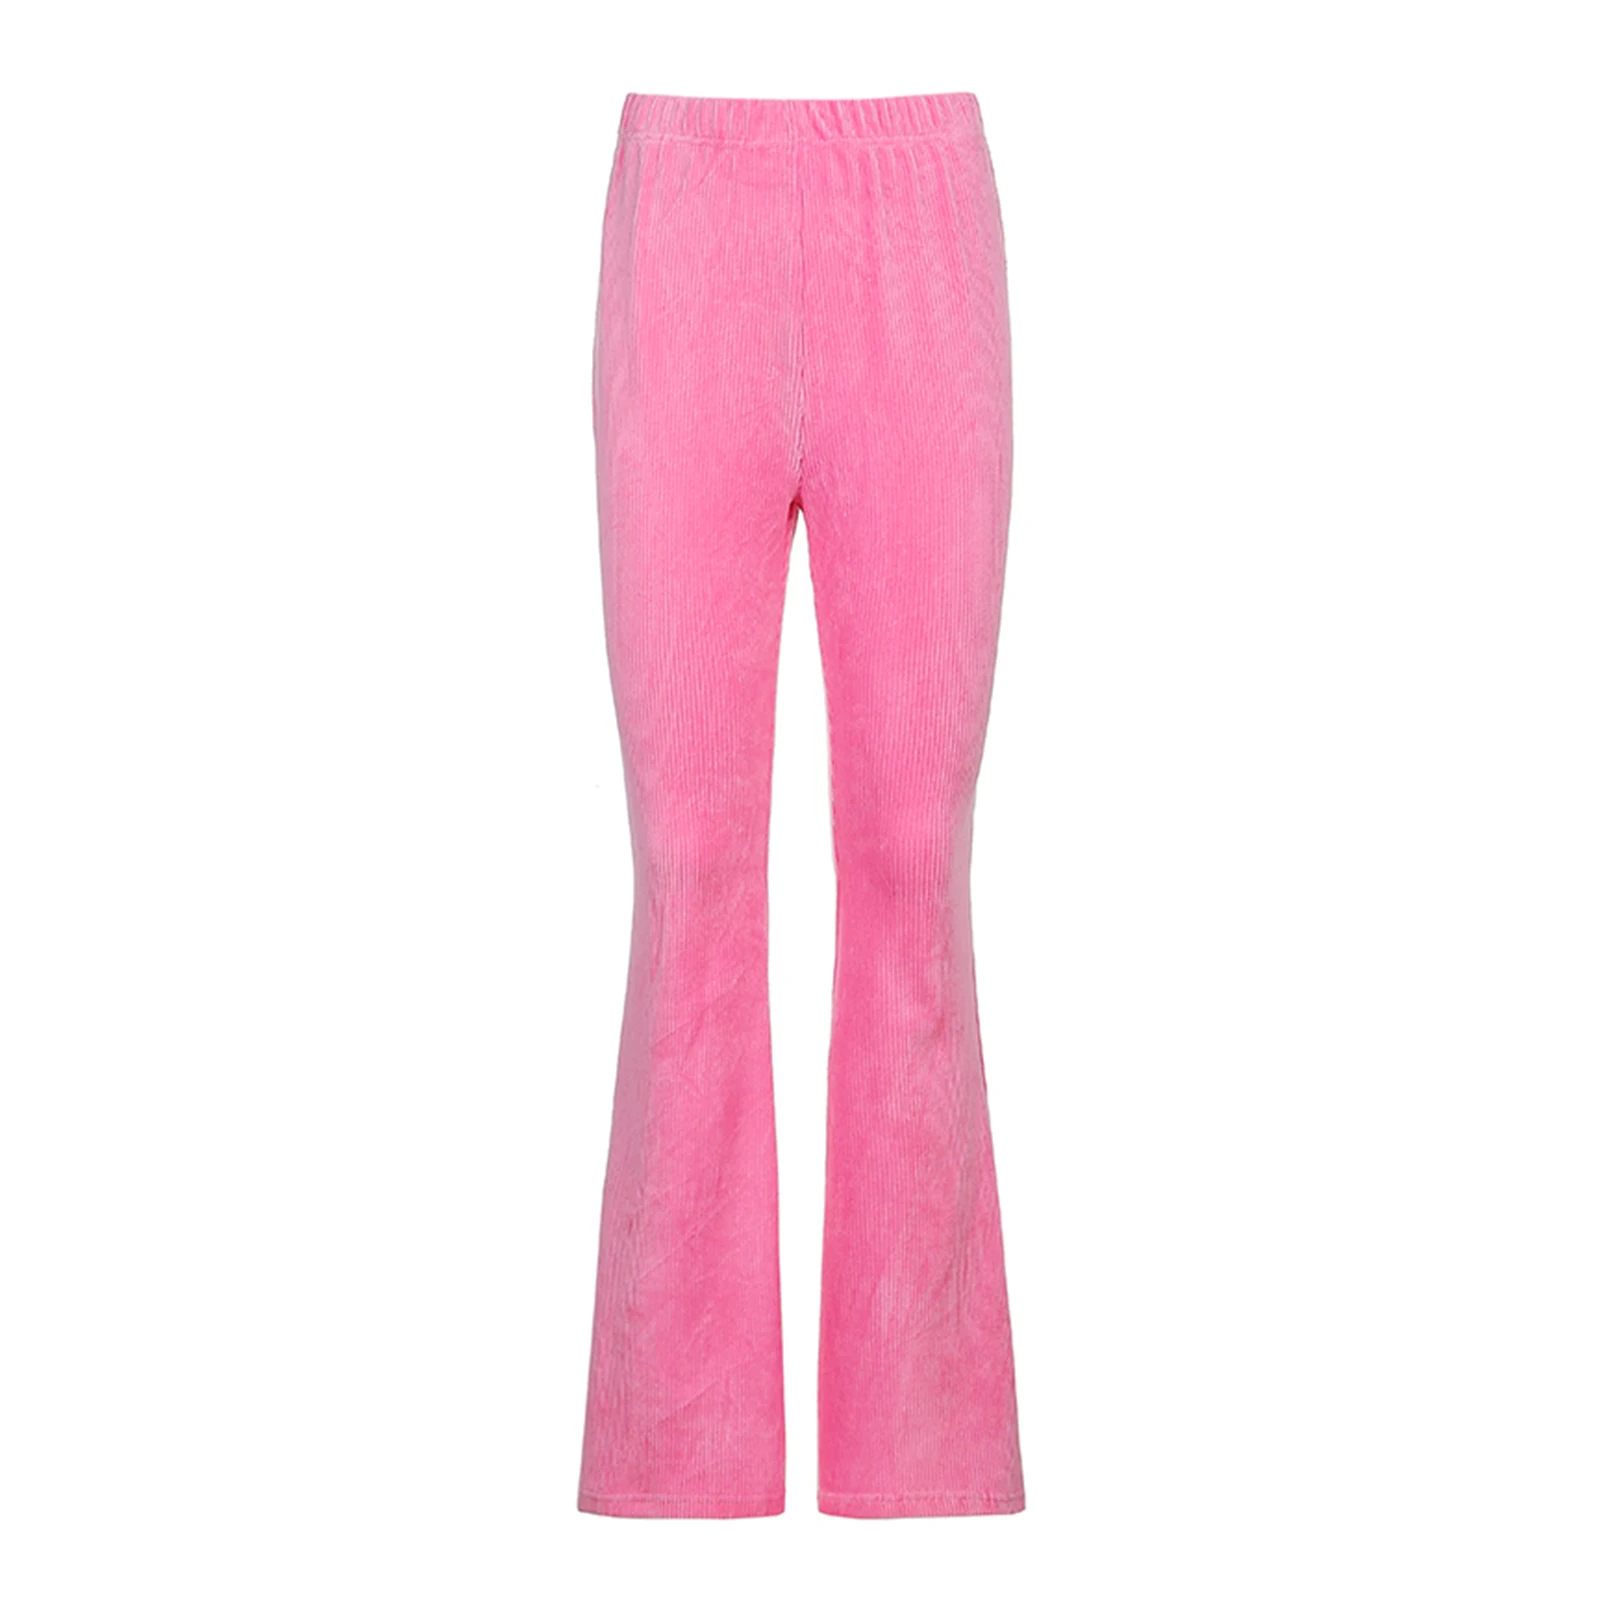 

Ladies High-waist Corduroy Pants, Slim-fit Flared Casual Pants, Straight and Mopping Solid Color Trousers